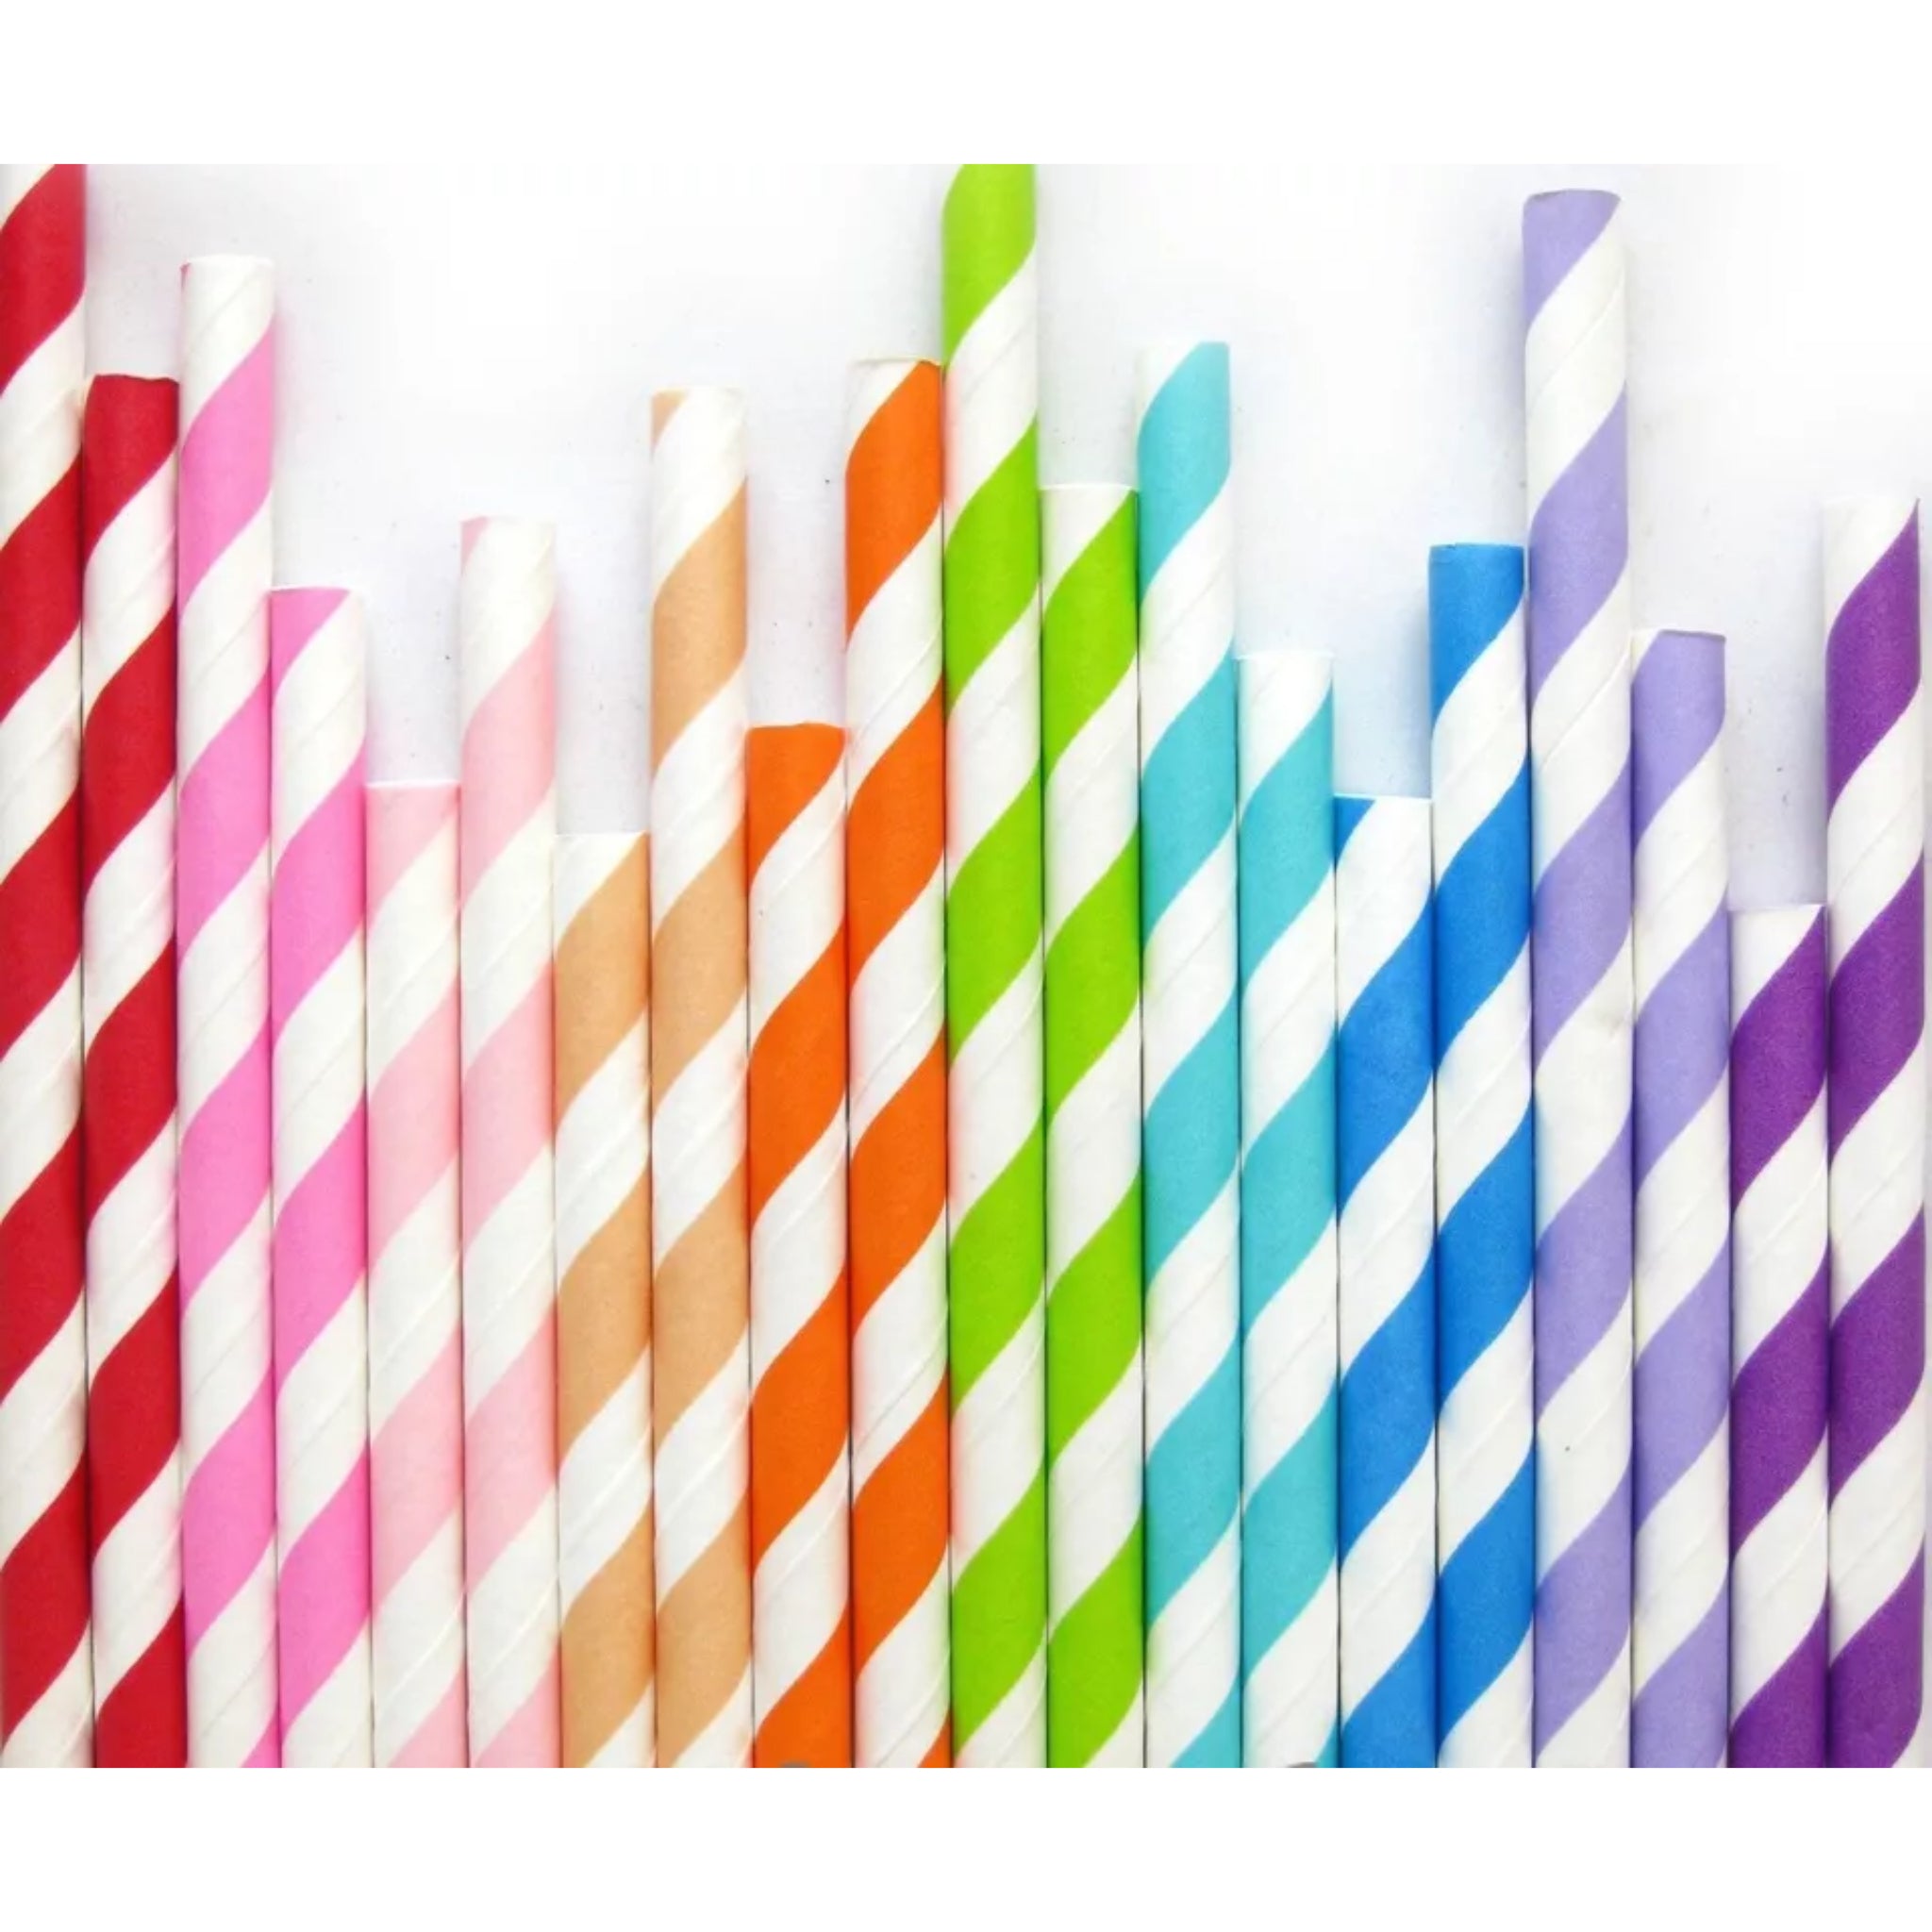 Beclen Harp 50 Disposable Paper Straws | Stripy | Drinking Straws Eco Friendly Biodegradable